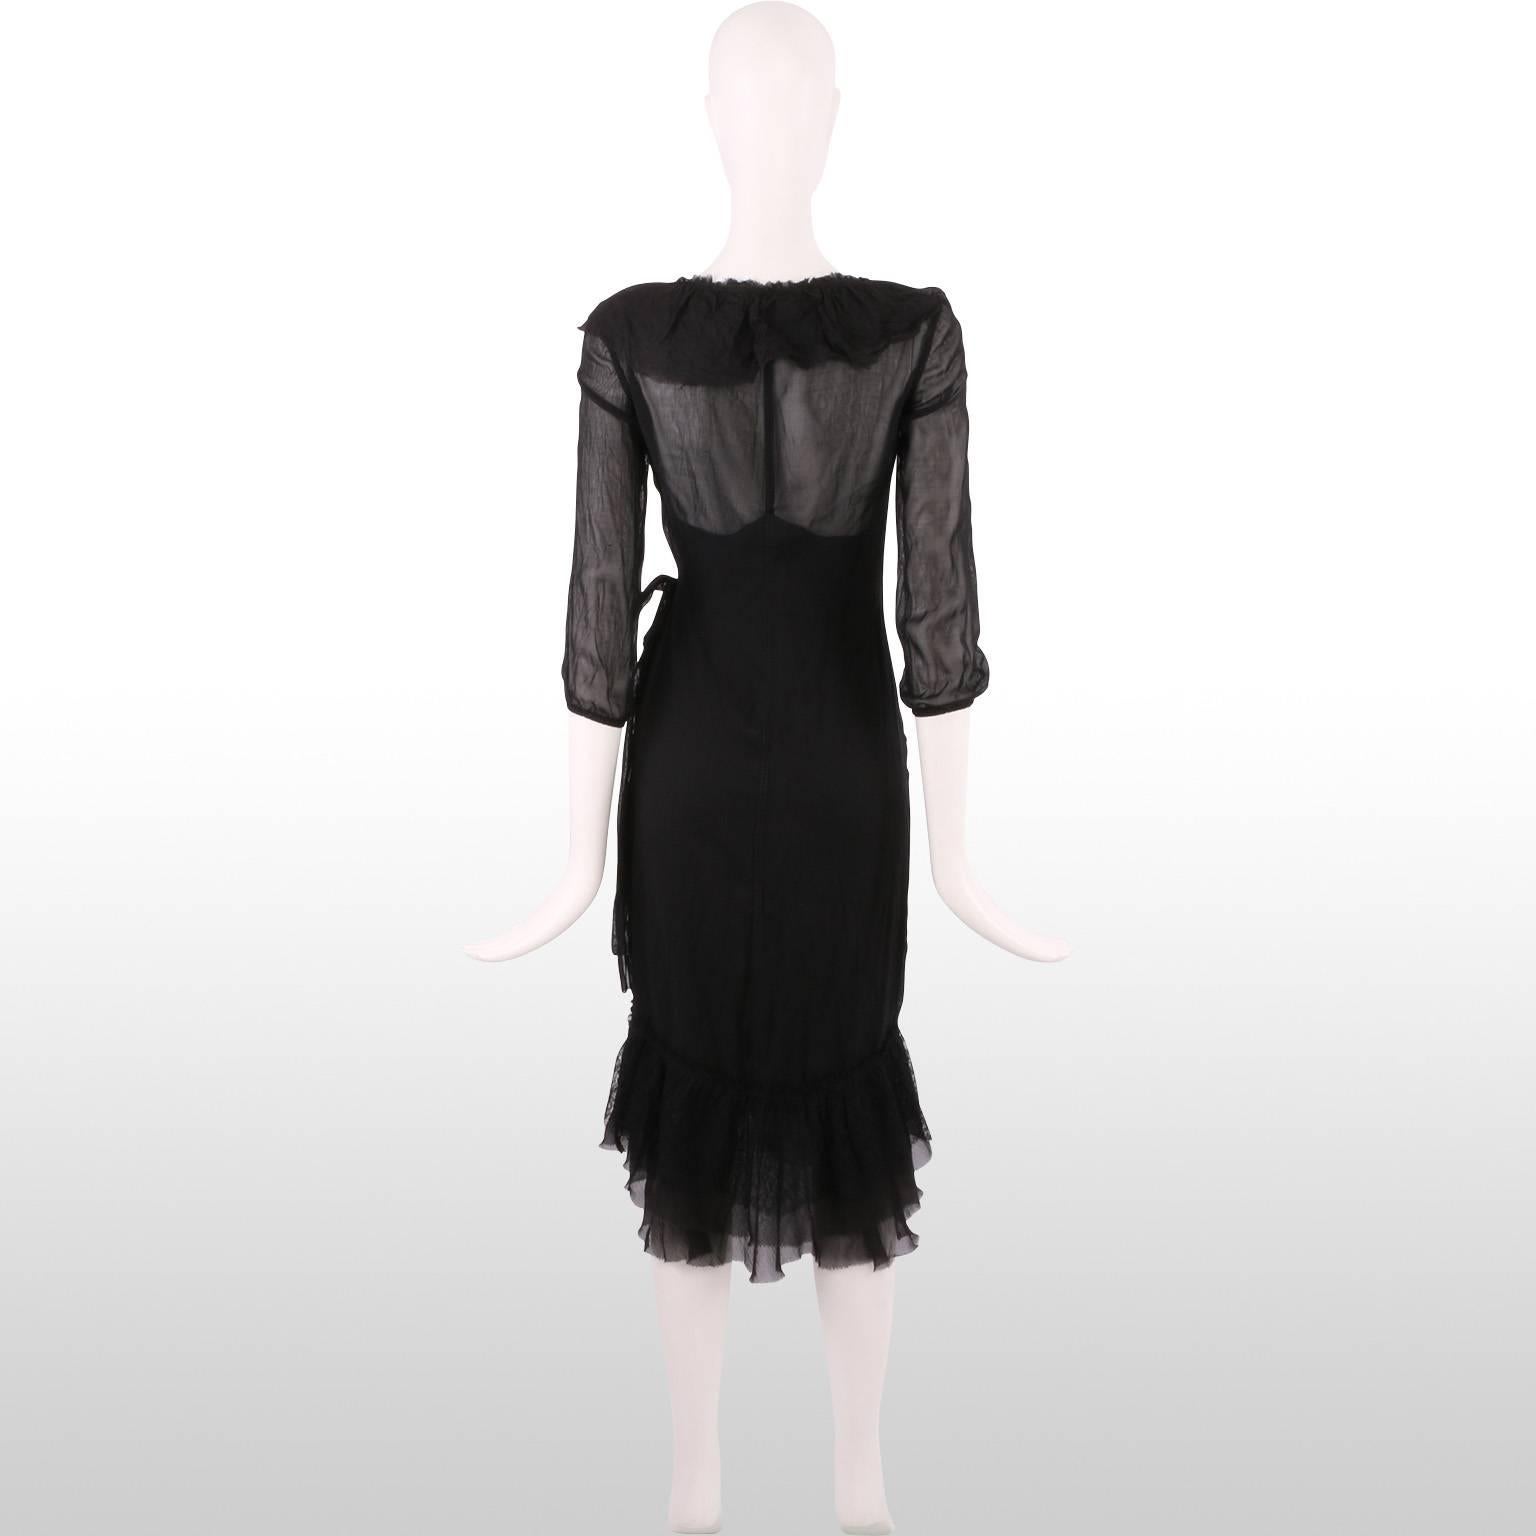 Women's Prada Black Silk Overlay Dress with Lace For Sale